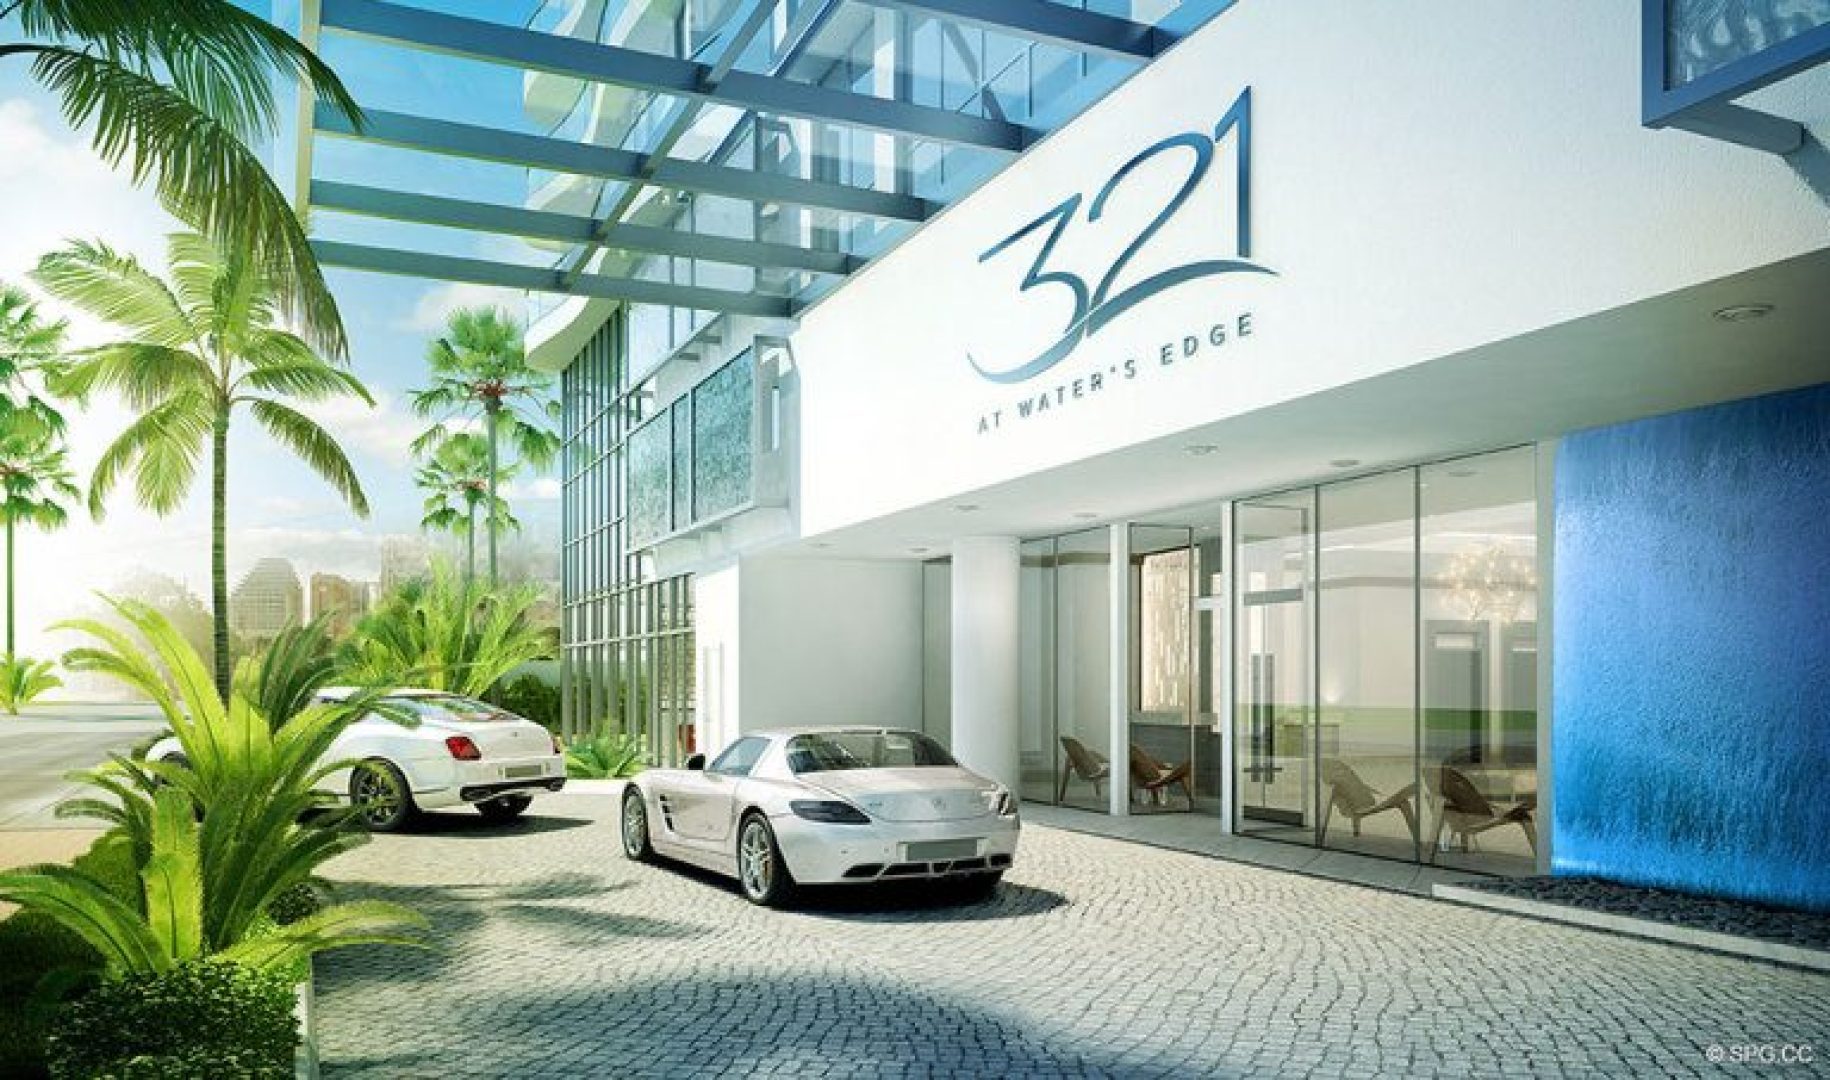 Entrance into 321 at Water's Edge, Luxury Waterfront Condos in Fort Lauderdale, Florida 33304